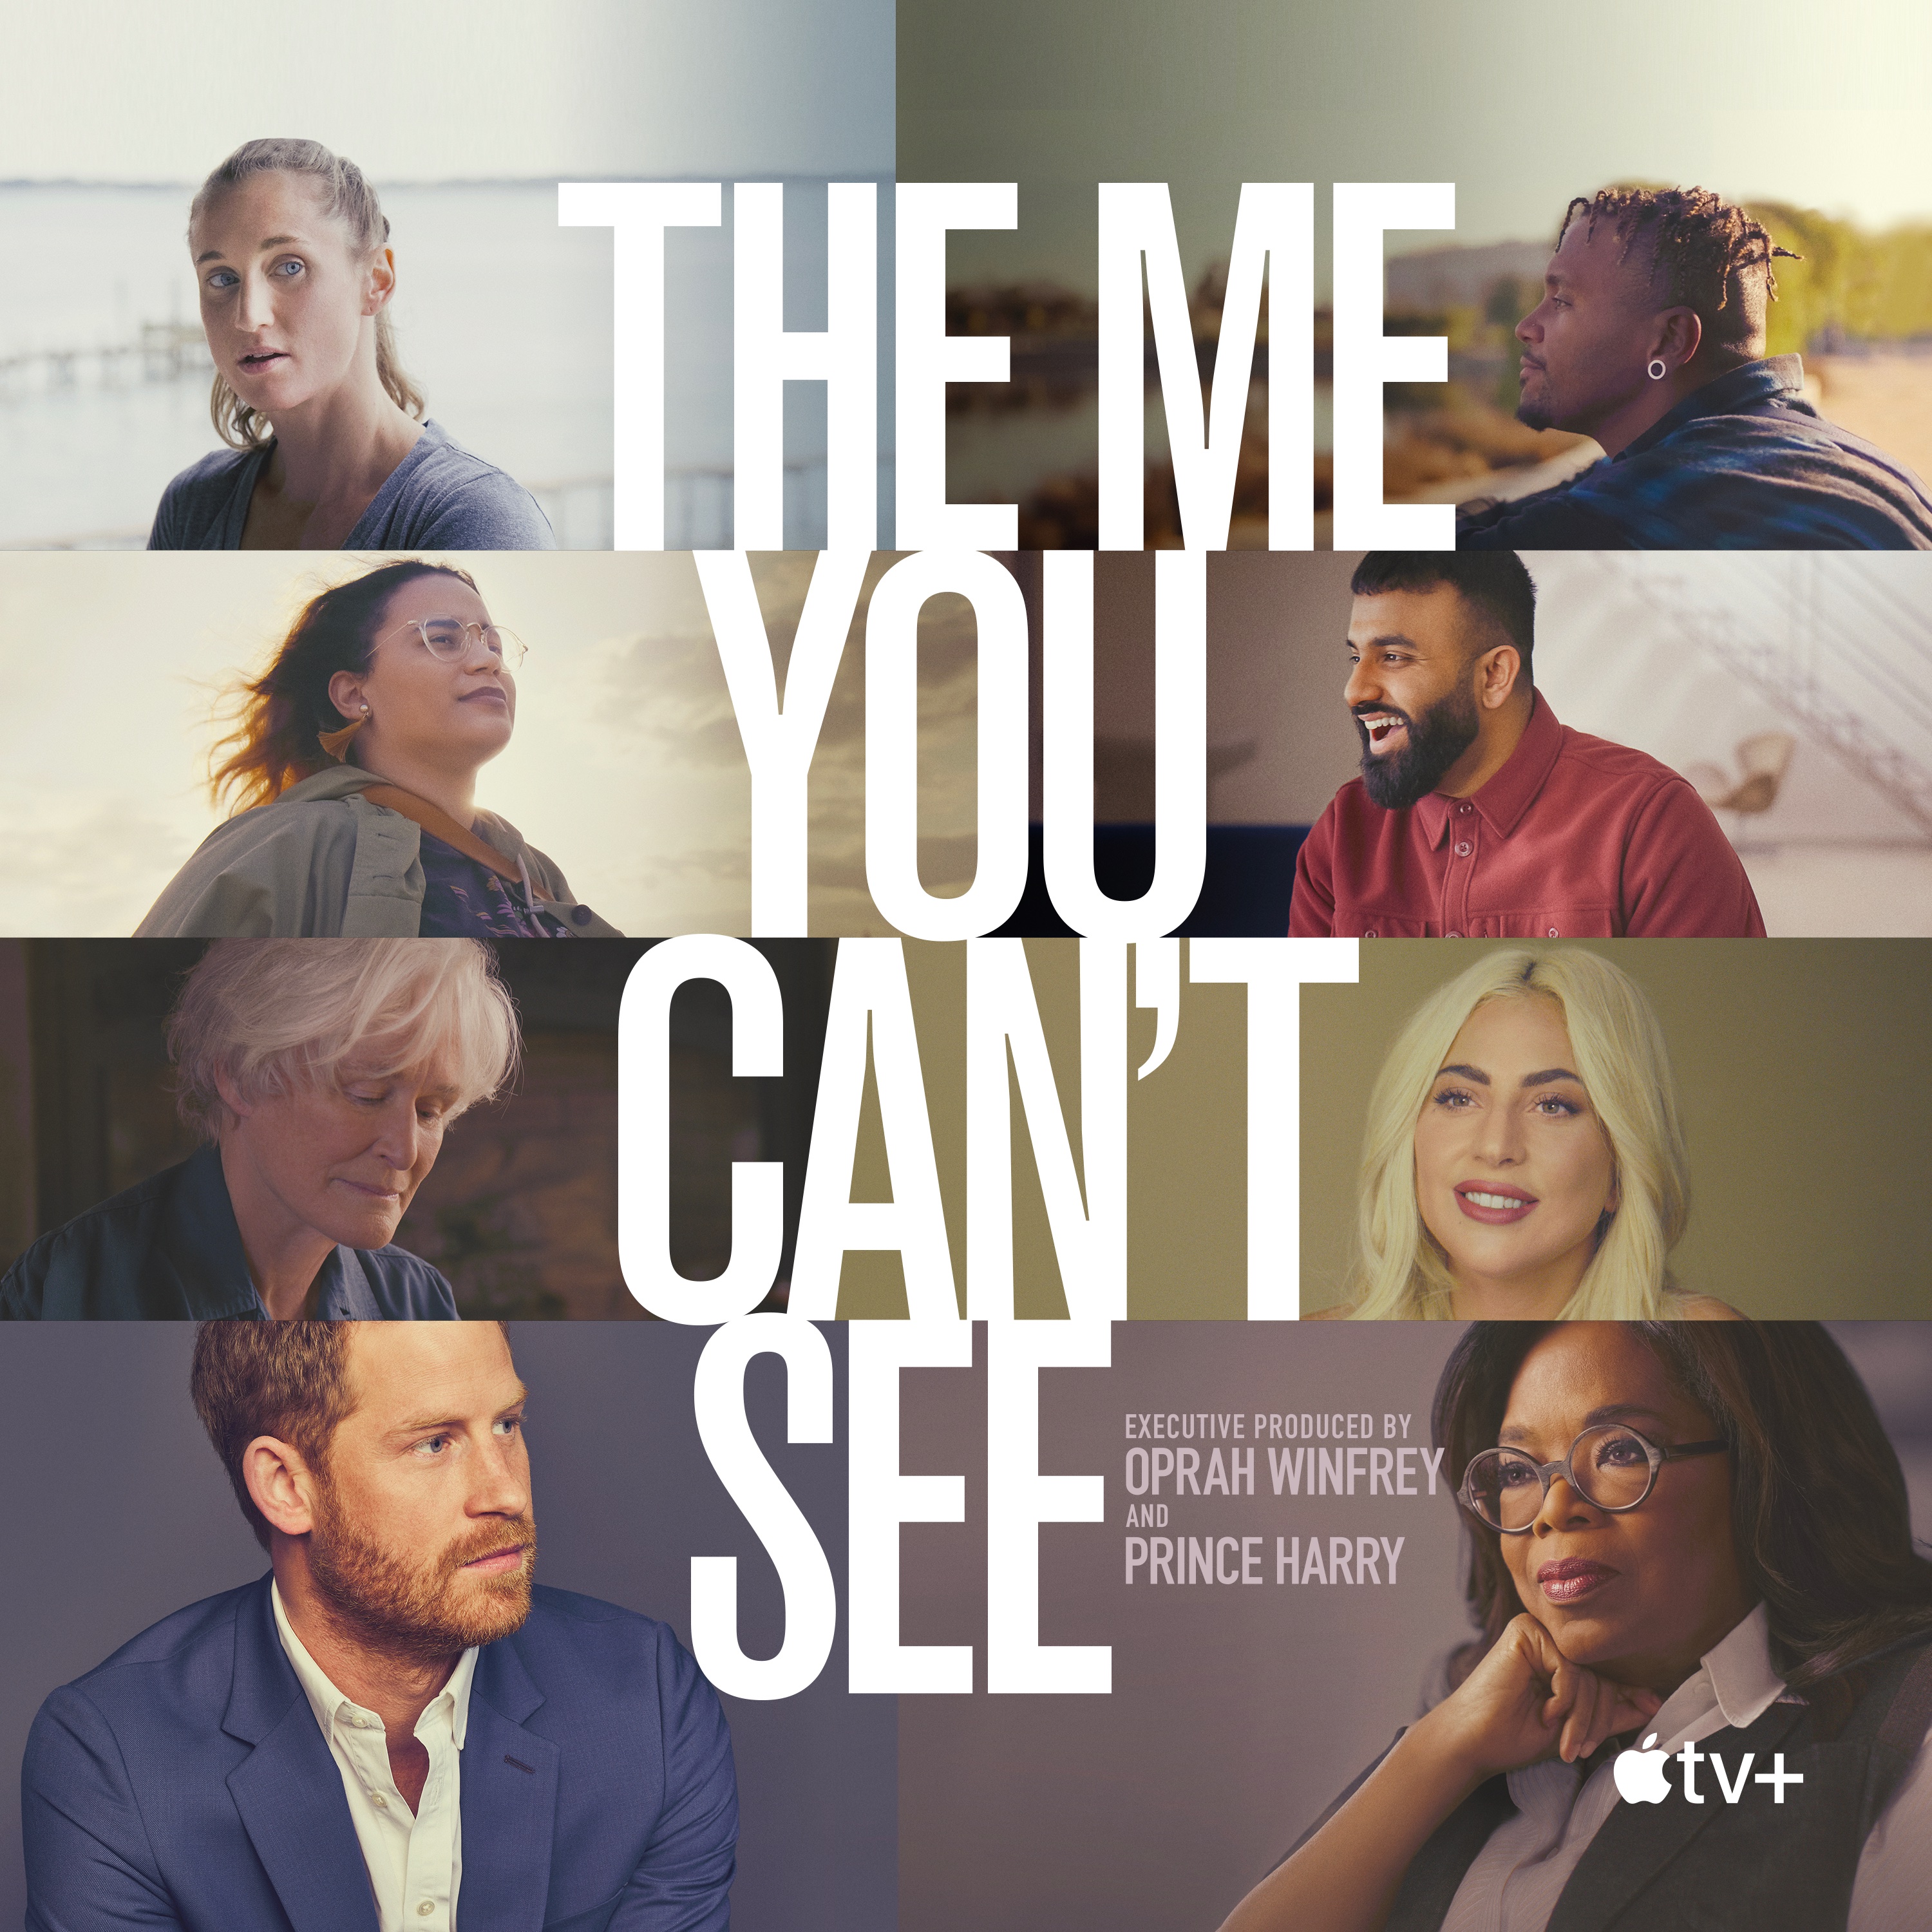 jøde Vågn op Shining Apple TV on Twitter: "#TheMeYouCantSee is a new docuseries co-created by  @Oprah and Prince Harry that explores mental health and emotional  well-being with stories from people around the world. Watch all episodes